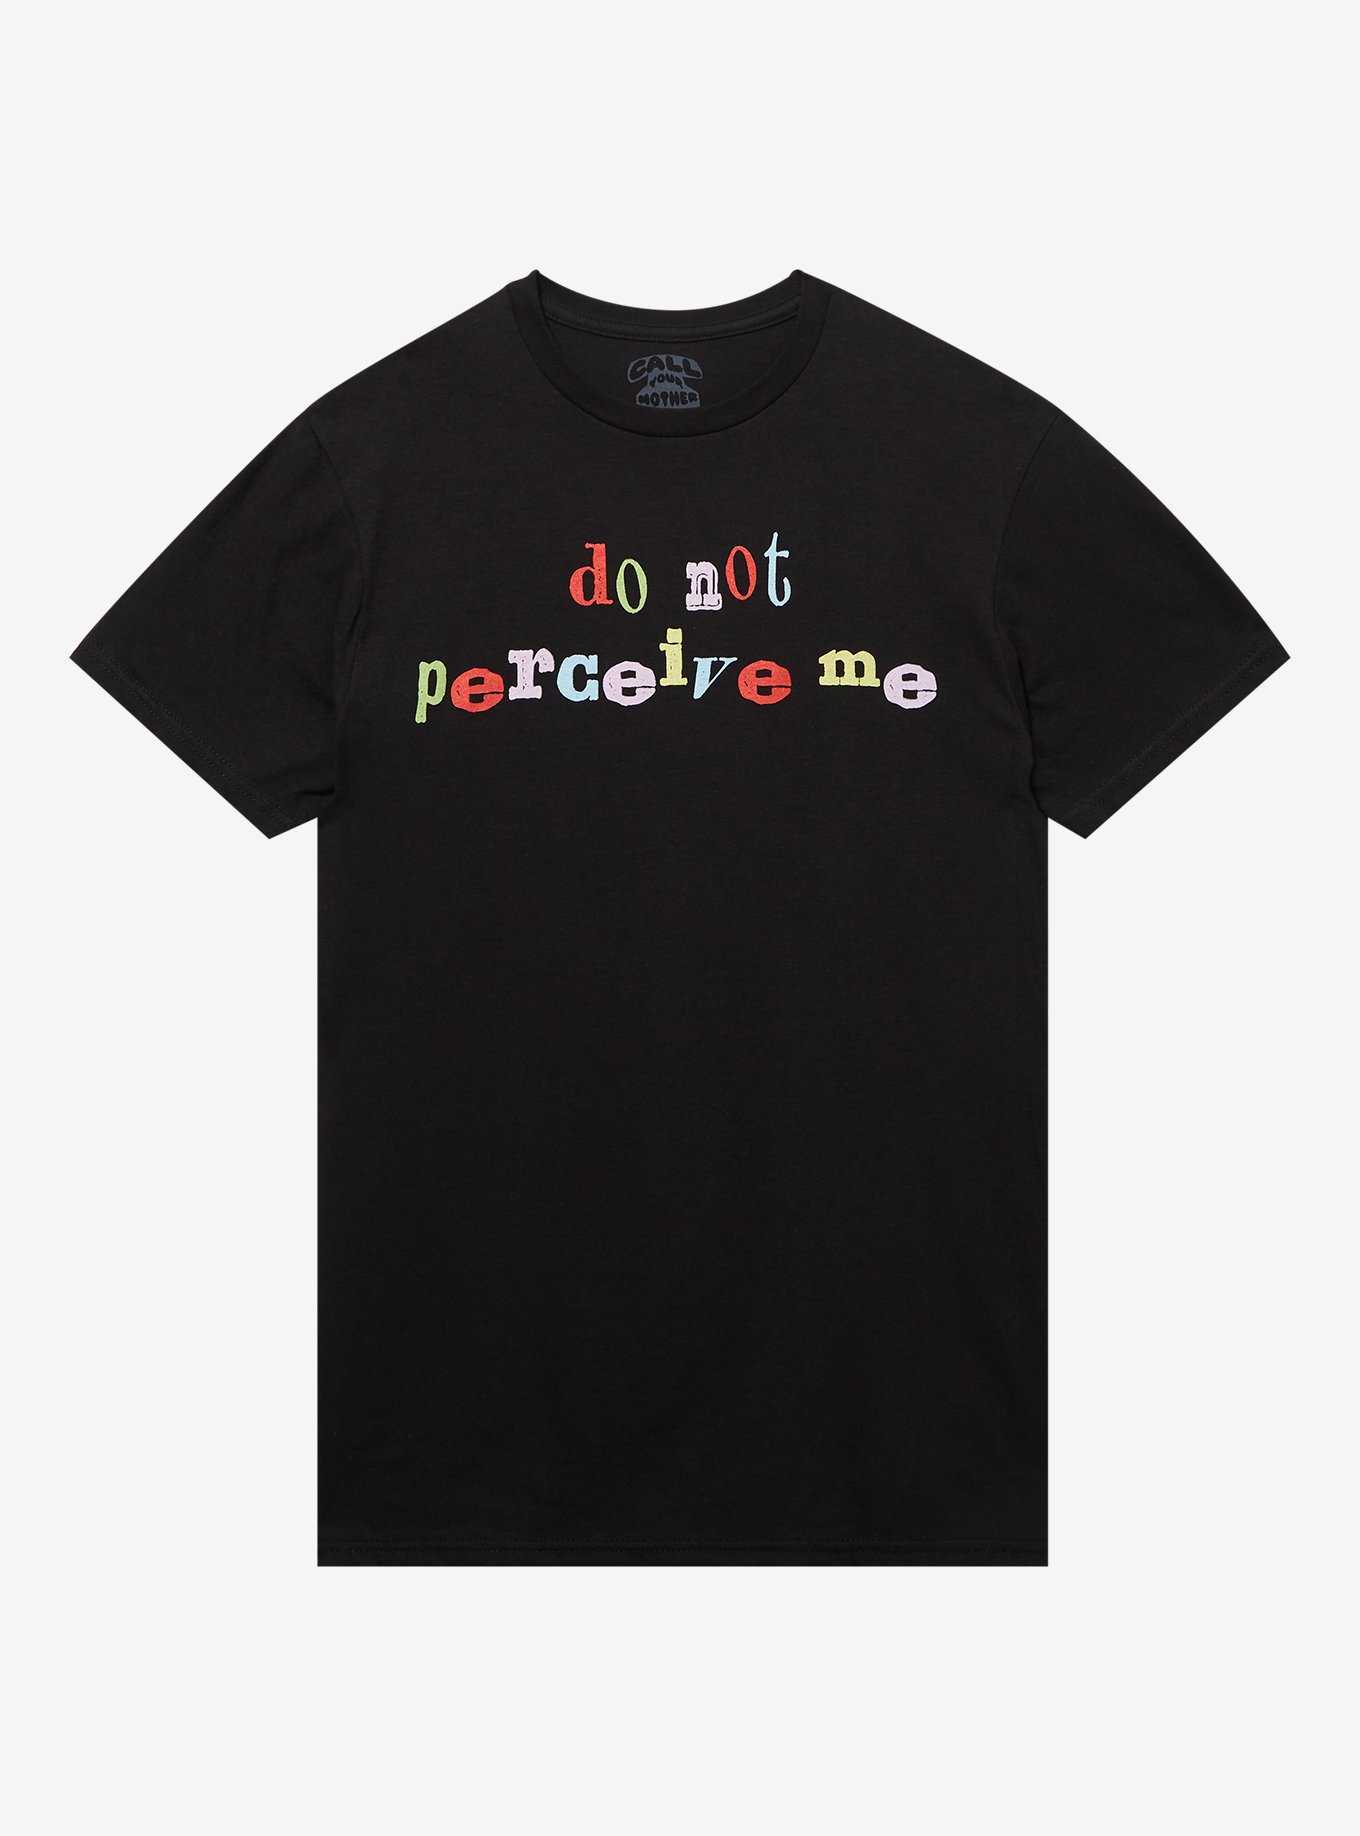 Don't Perceive Me T-Shirt By Call Your Mother, , hi-res